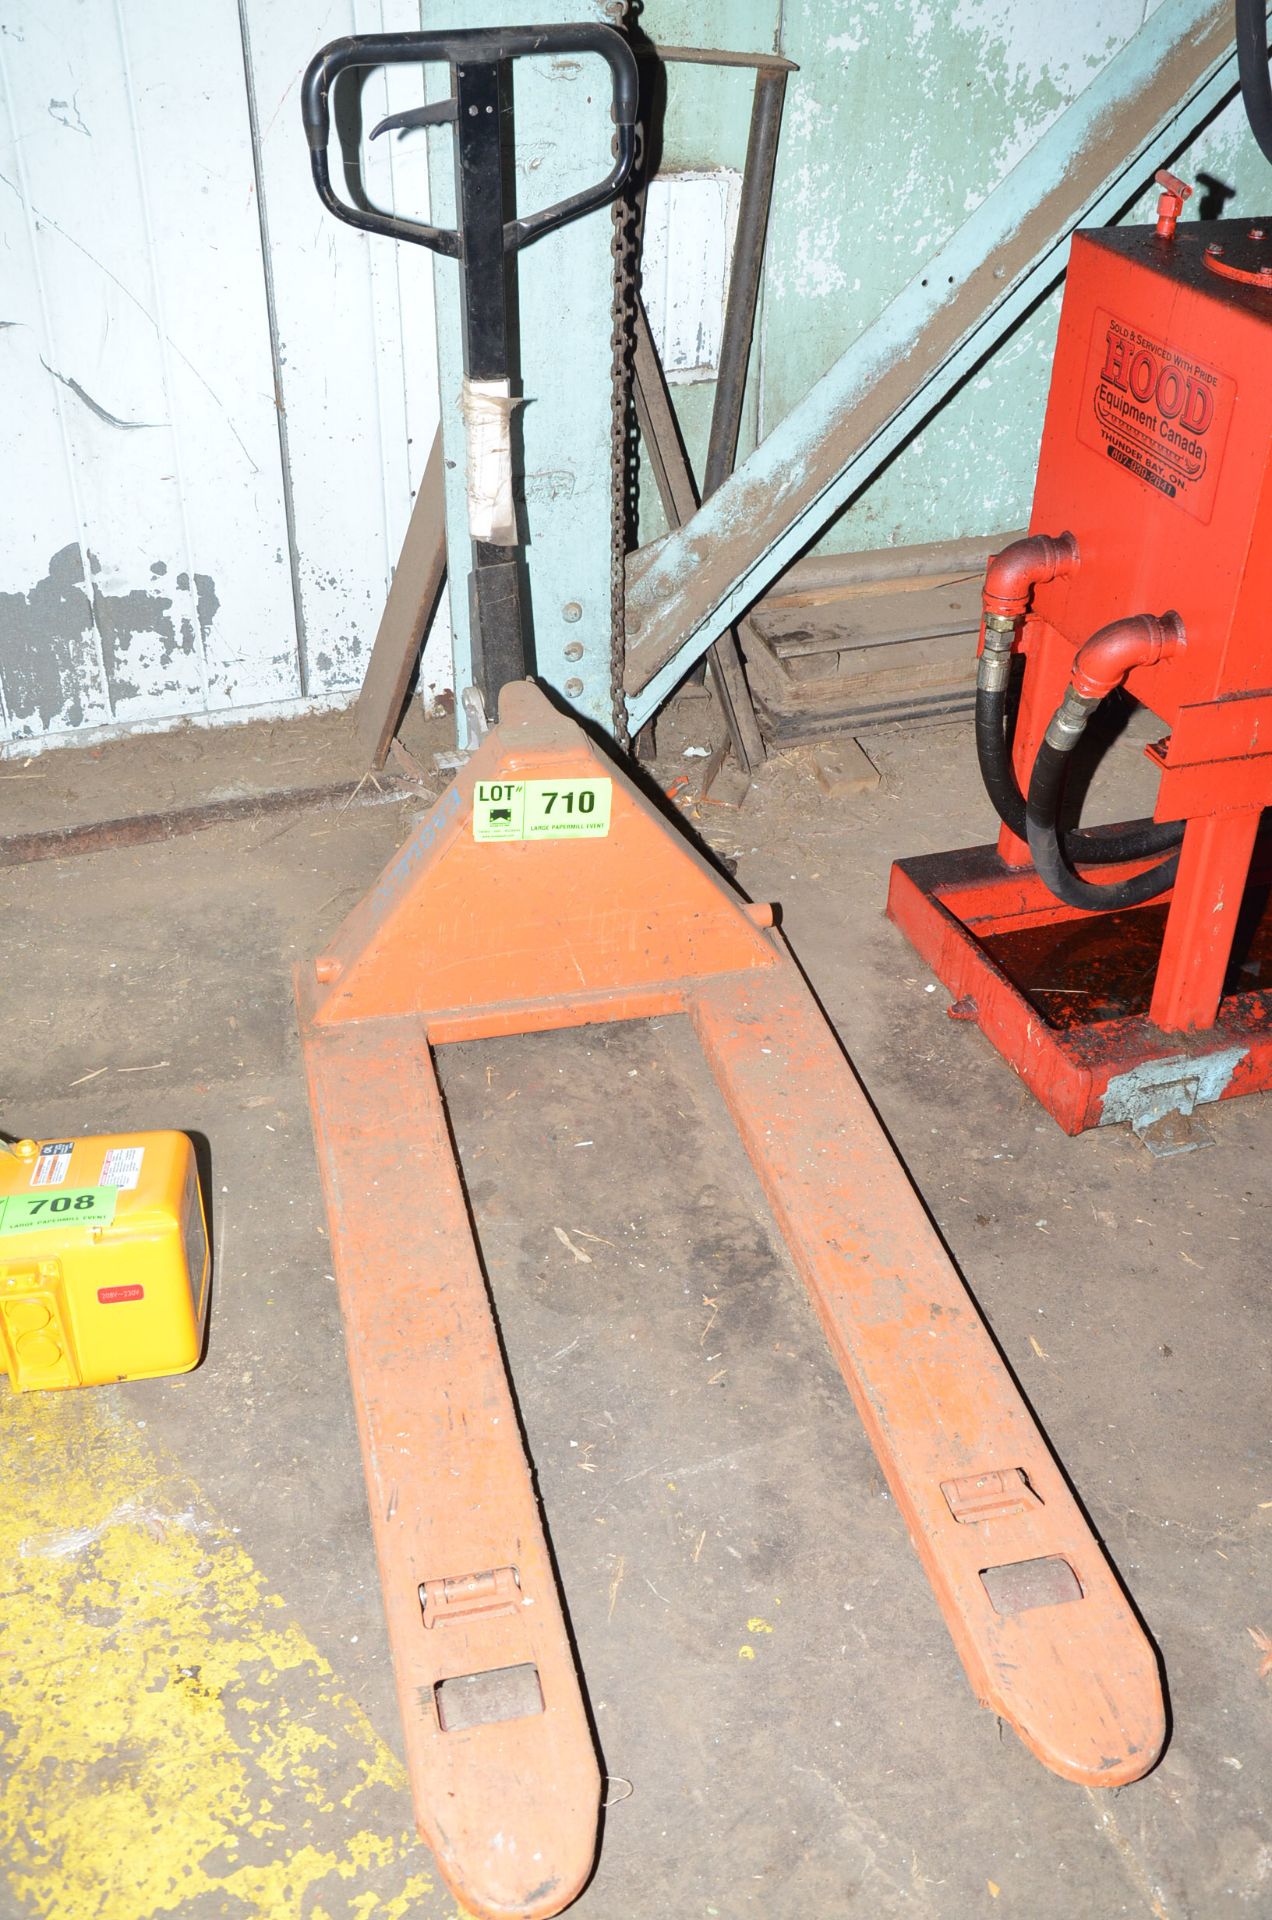 HYDRAULIC PALLET TRUCK [RIGGING FEES FOR LOT #710 - $60 USD PLUS APPLICABLE TAXES]